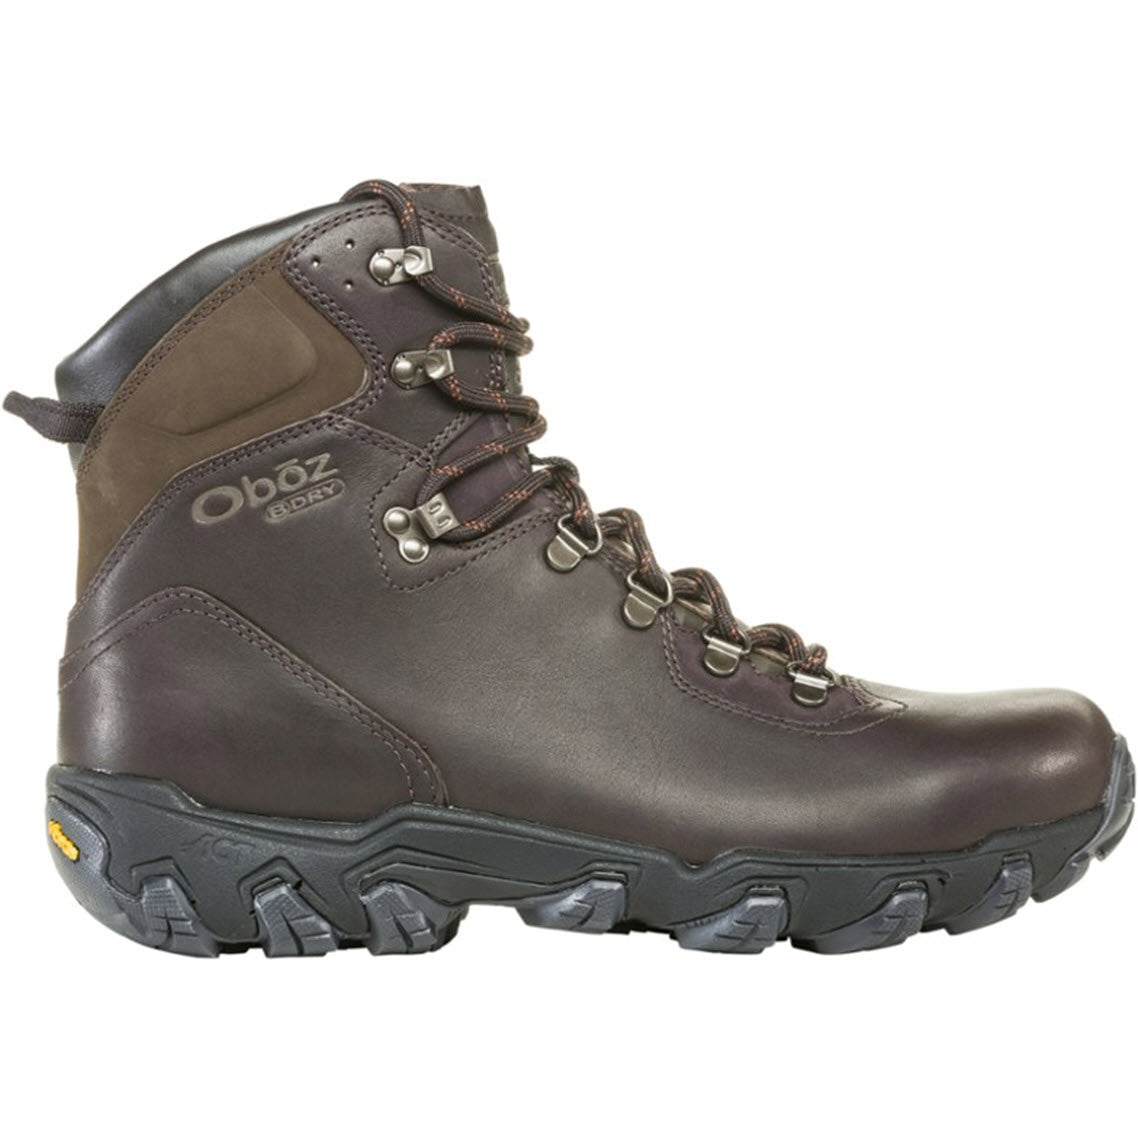 Replace the product in the sentence below with the given product name and brand name.
&quot;Brown Oboz Yellowstone Premium Mid Bdry Espresso boot with black sole.